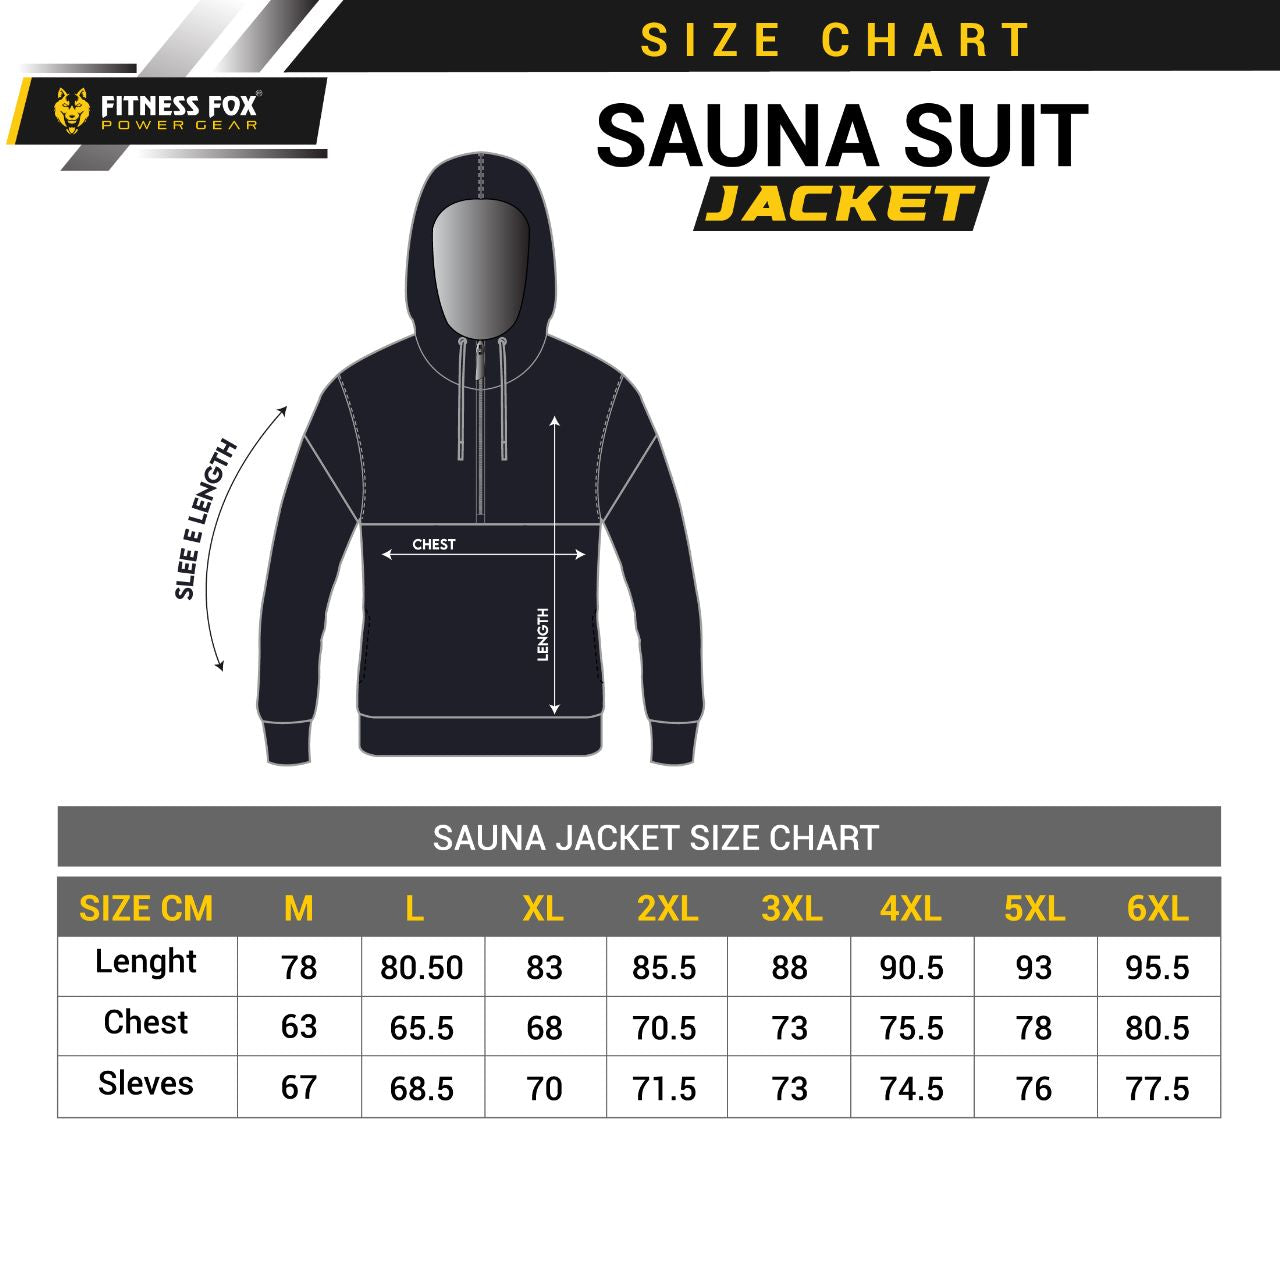 Sauna Jacket double layer (Gold limited edition)